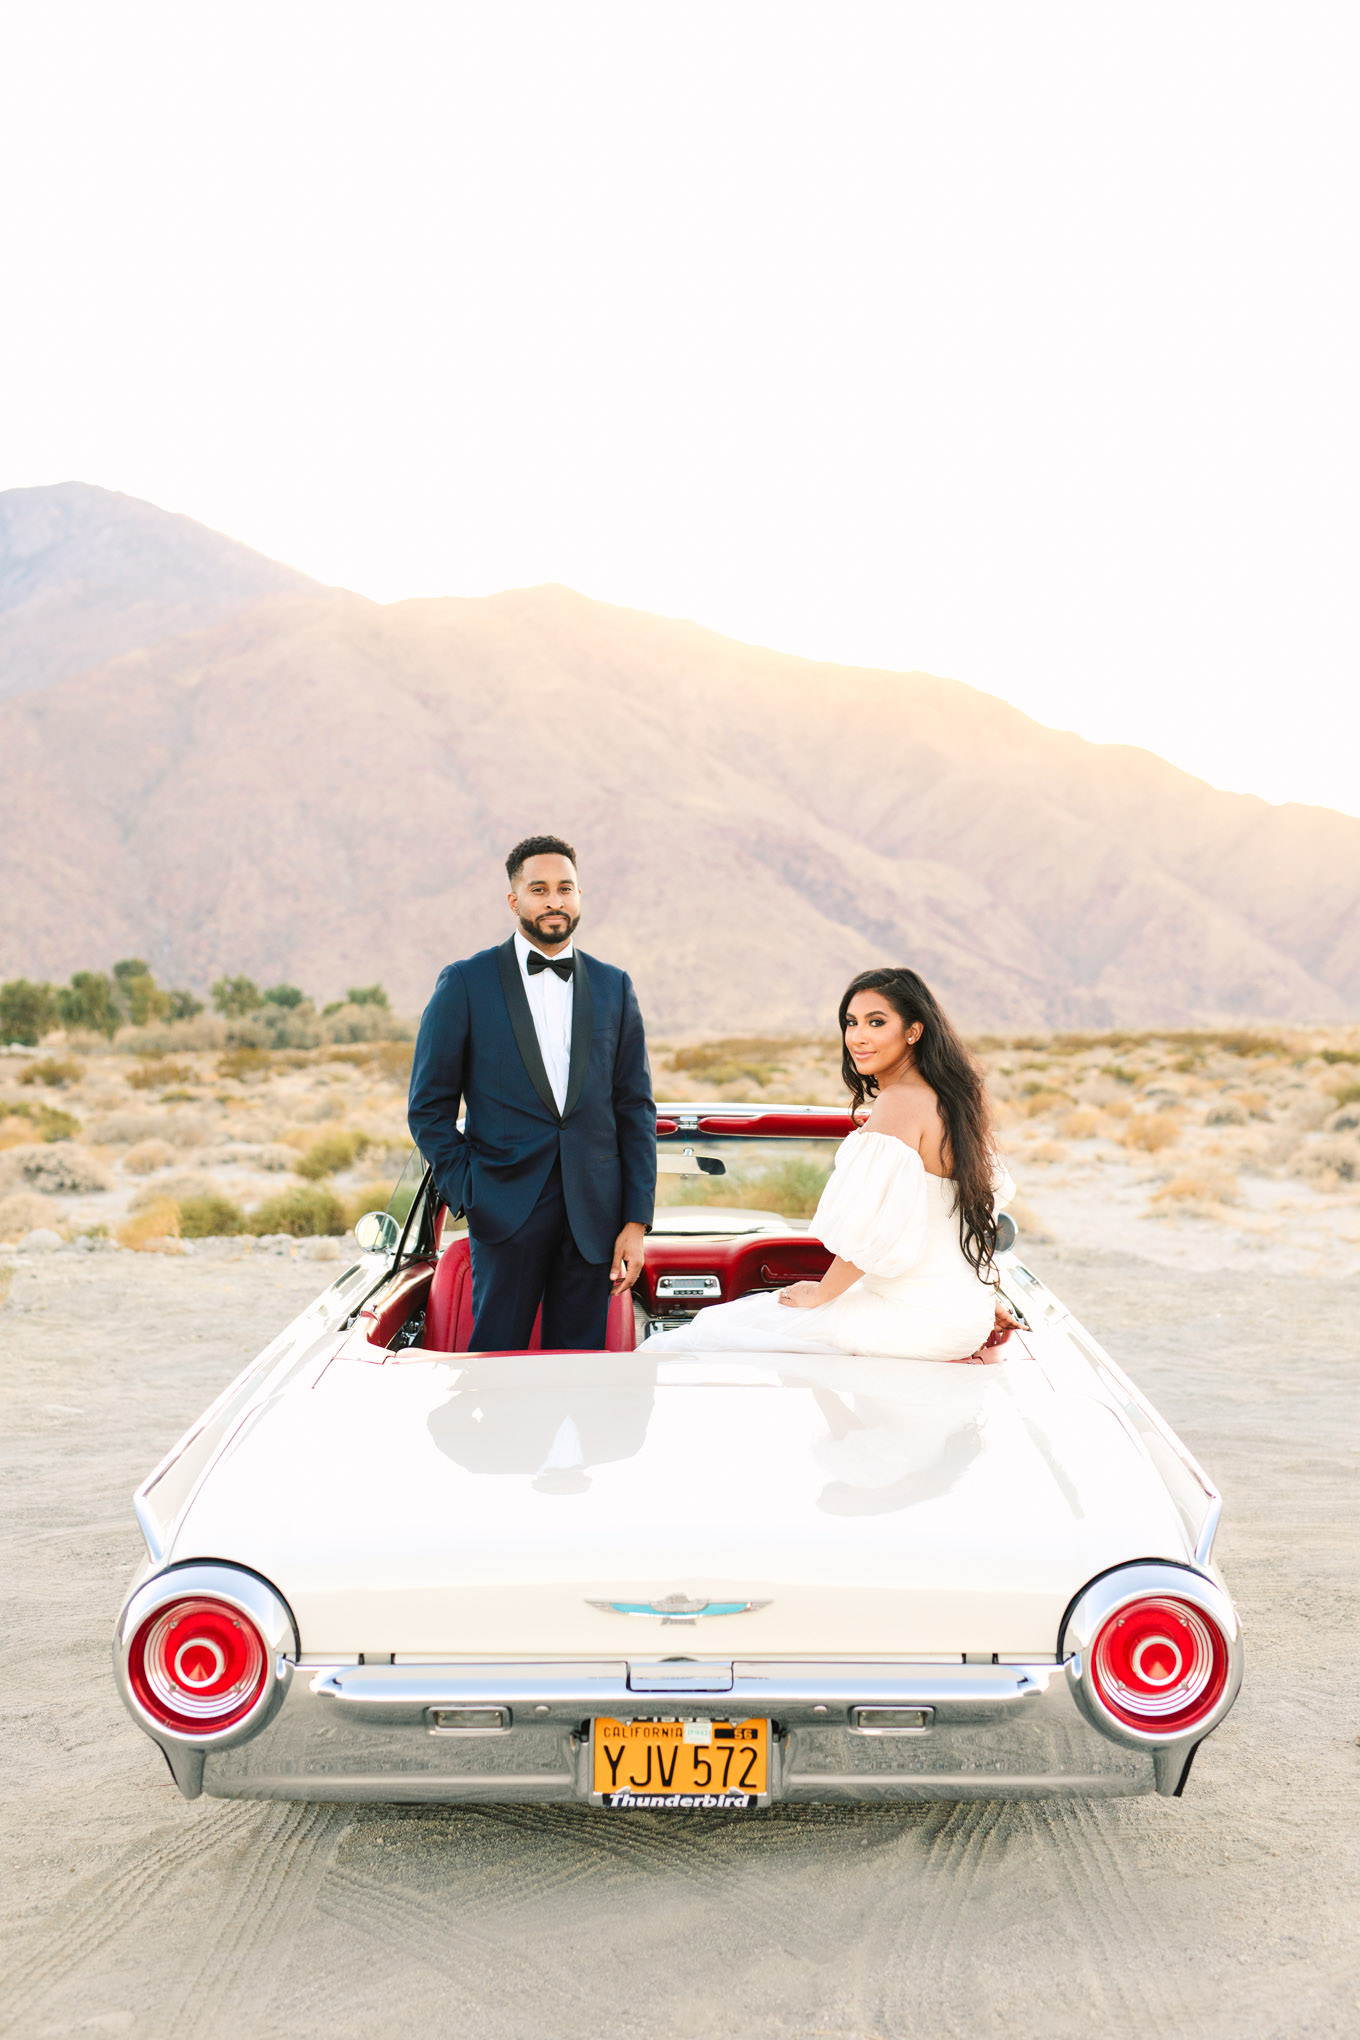 Bride and groom sitting in classic Ford Thunderbird for Palm Springs elopement | Engagement, elopement, and wedding photography roundup of Mary Costa’s favorite images from 2020 | Colorful and elevated photography for fun-loving couples in Southern California | #2020wedding #elopement #weddingphoto #weddingphotography #microwedding   Source: Mary Costa Photography | Los Angeles